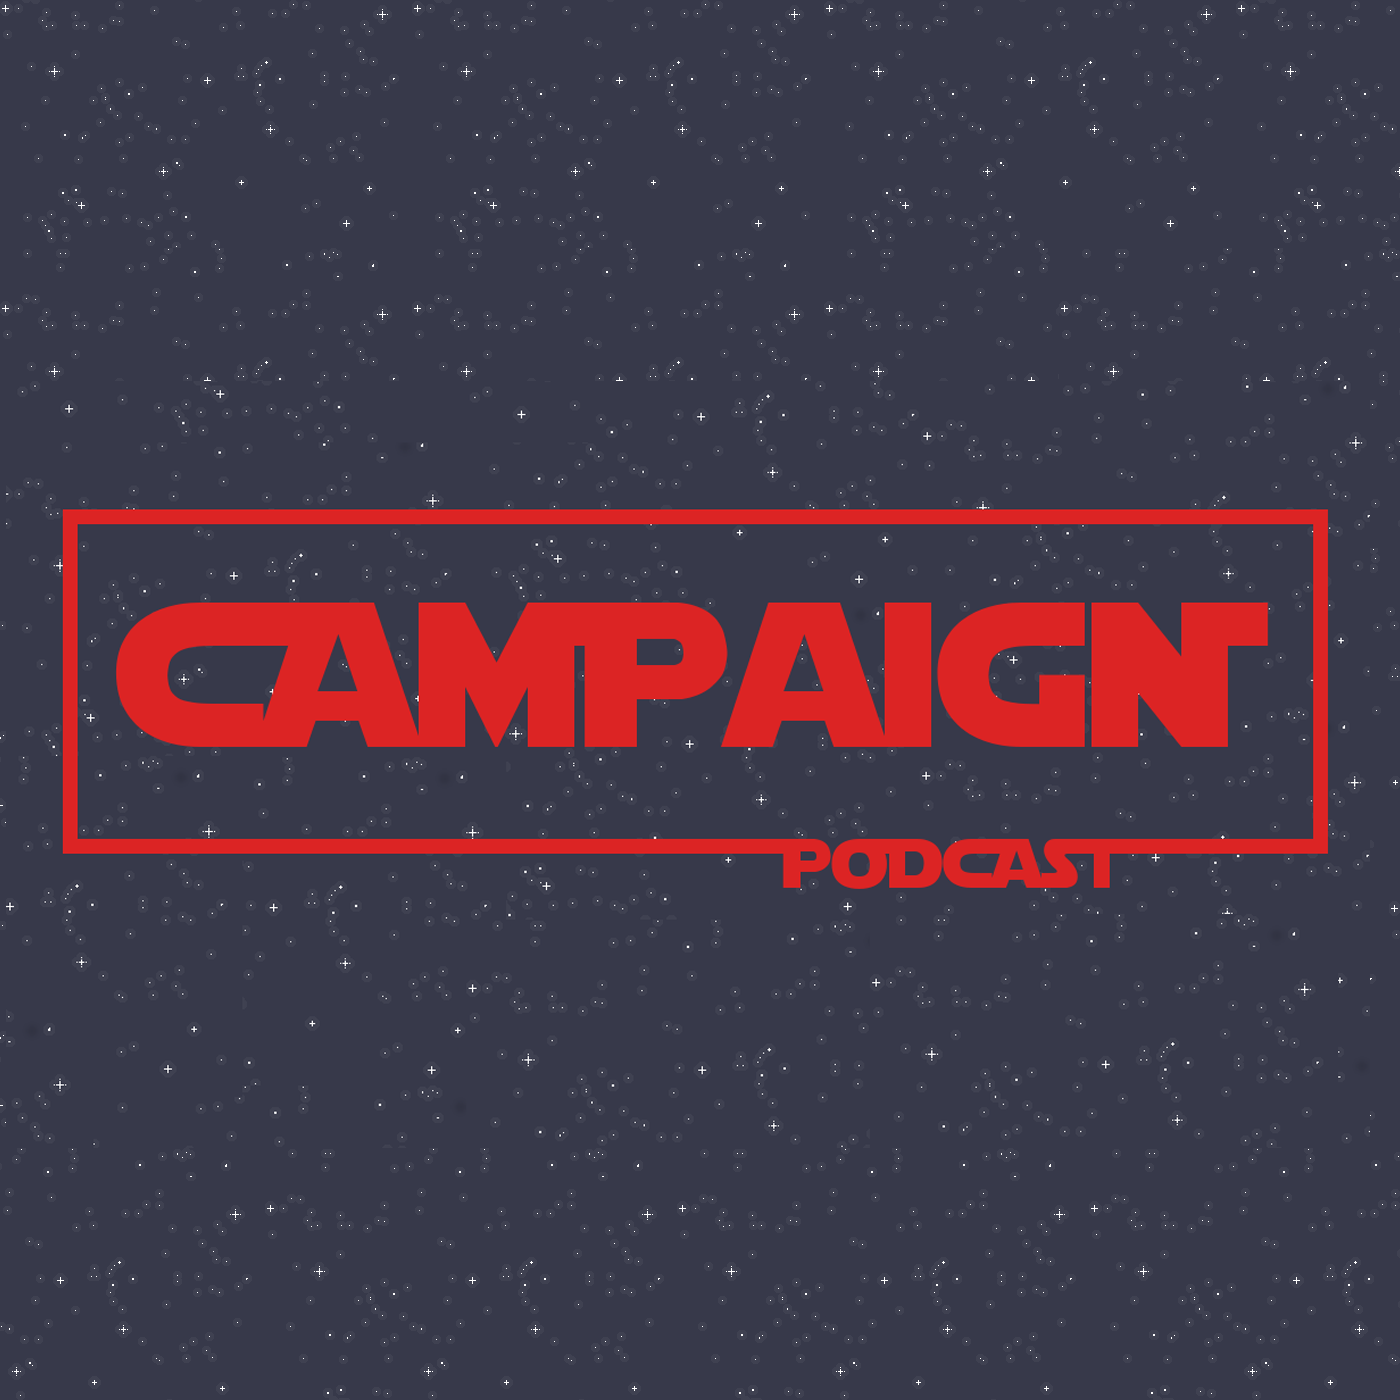 The Campaign Podcast